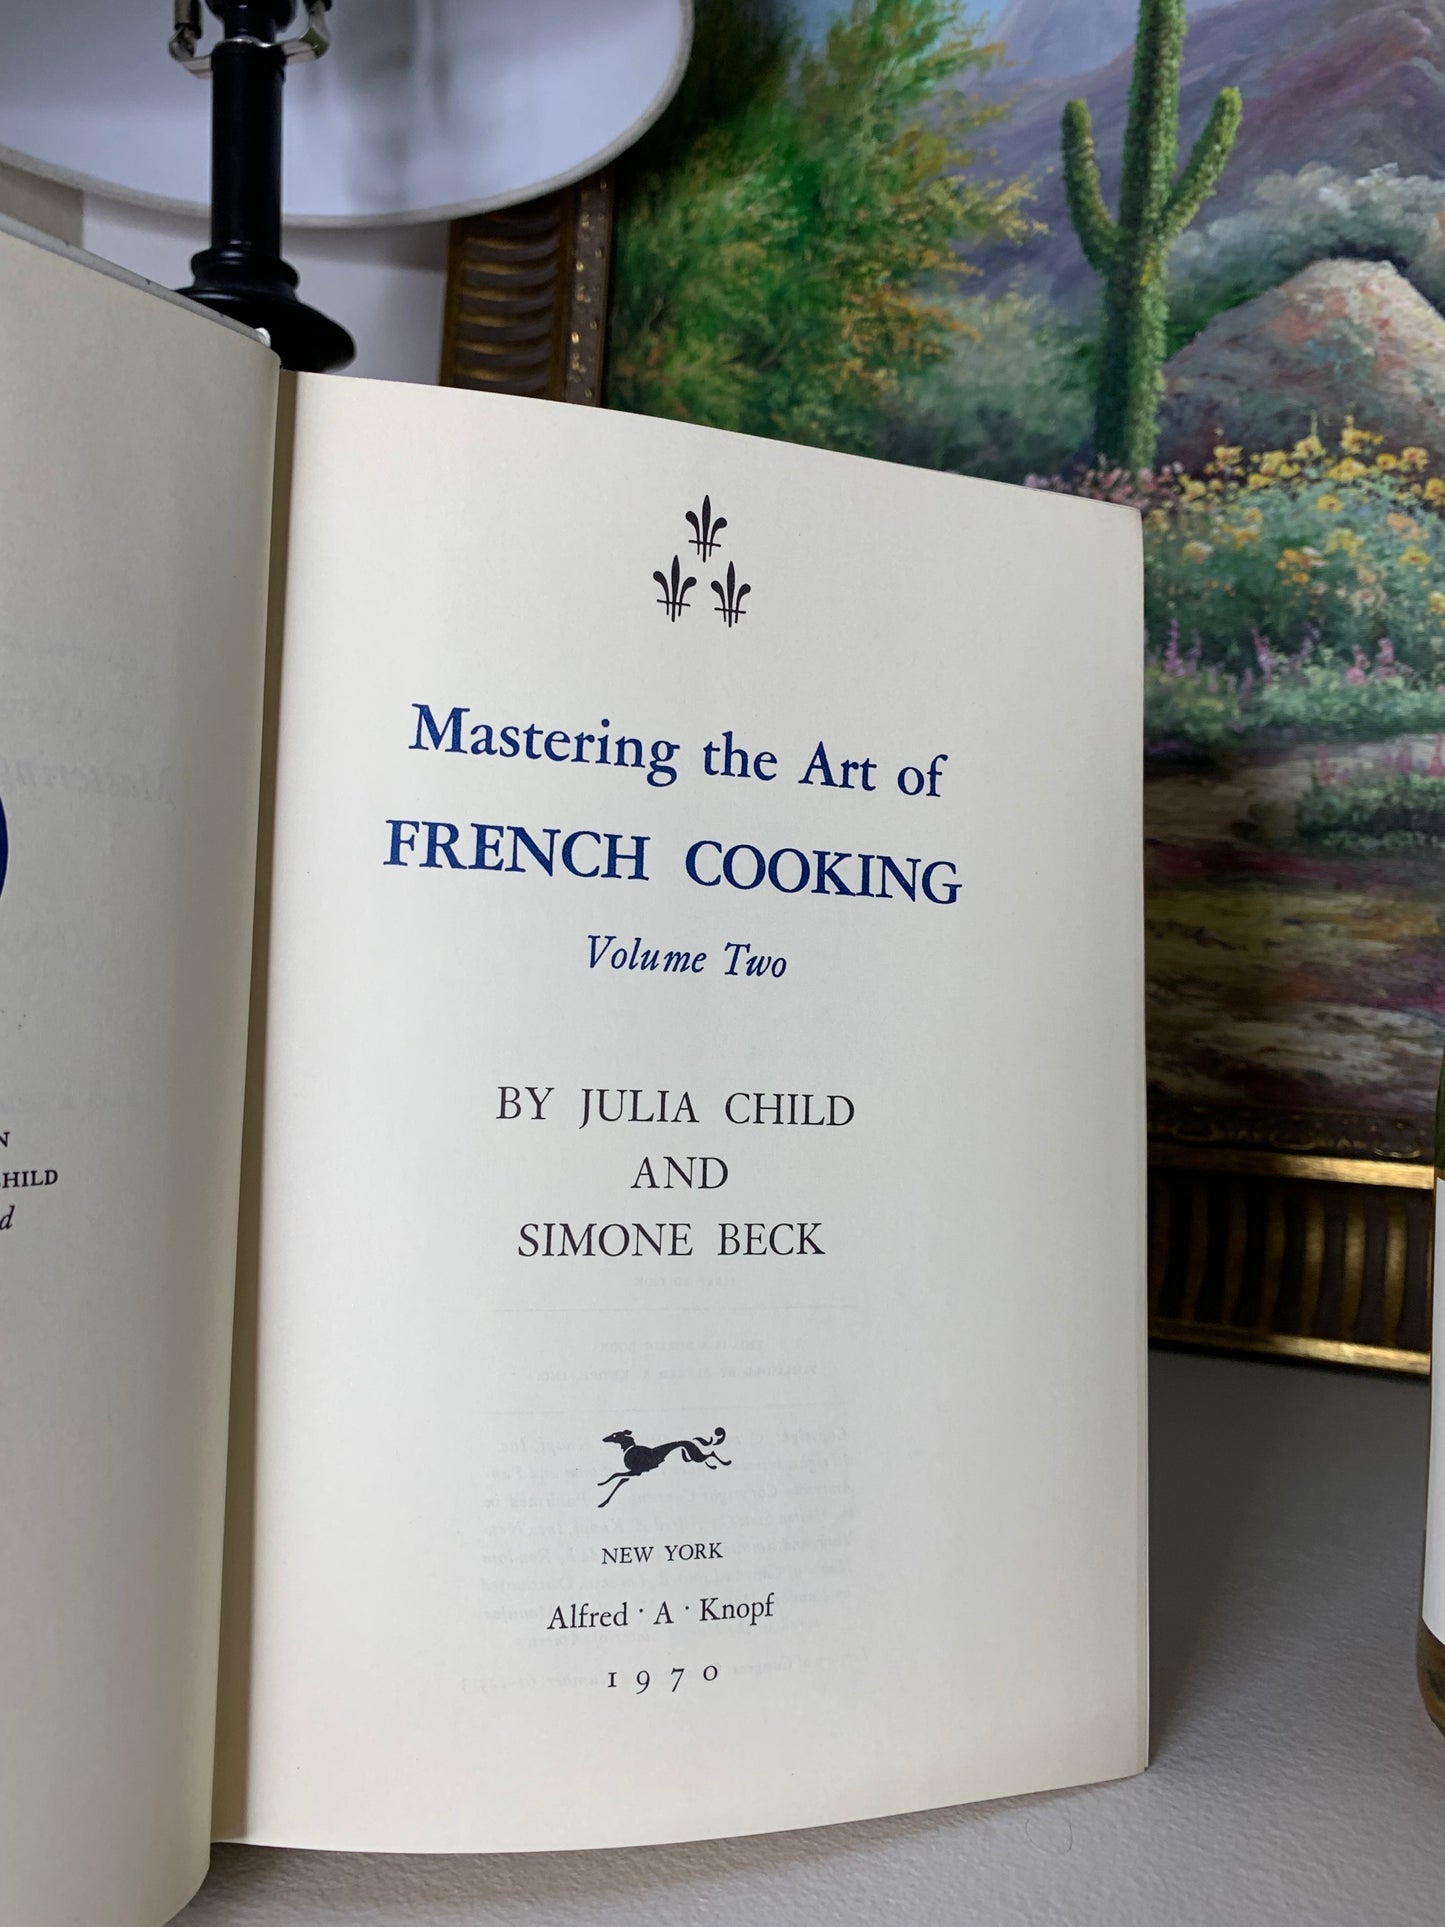 Rare 1970 First Edition Julia Childs Mastering the Art of French Cooking Volume 2! - Vintage condition!